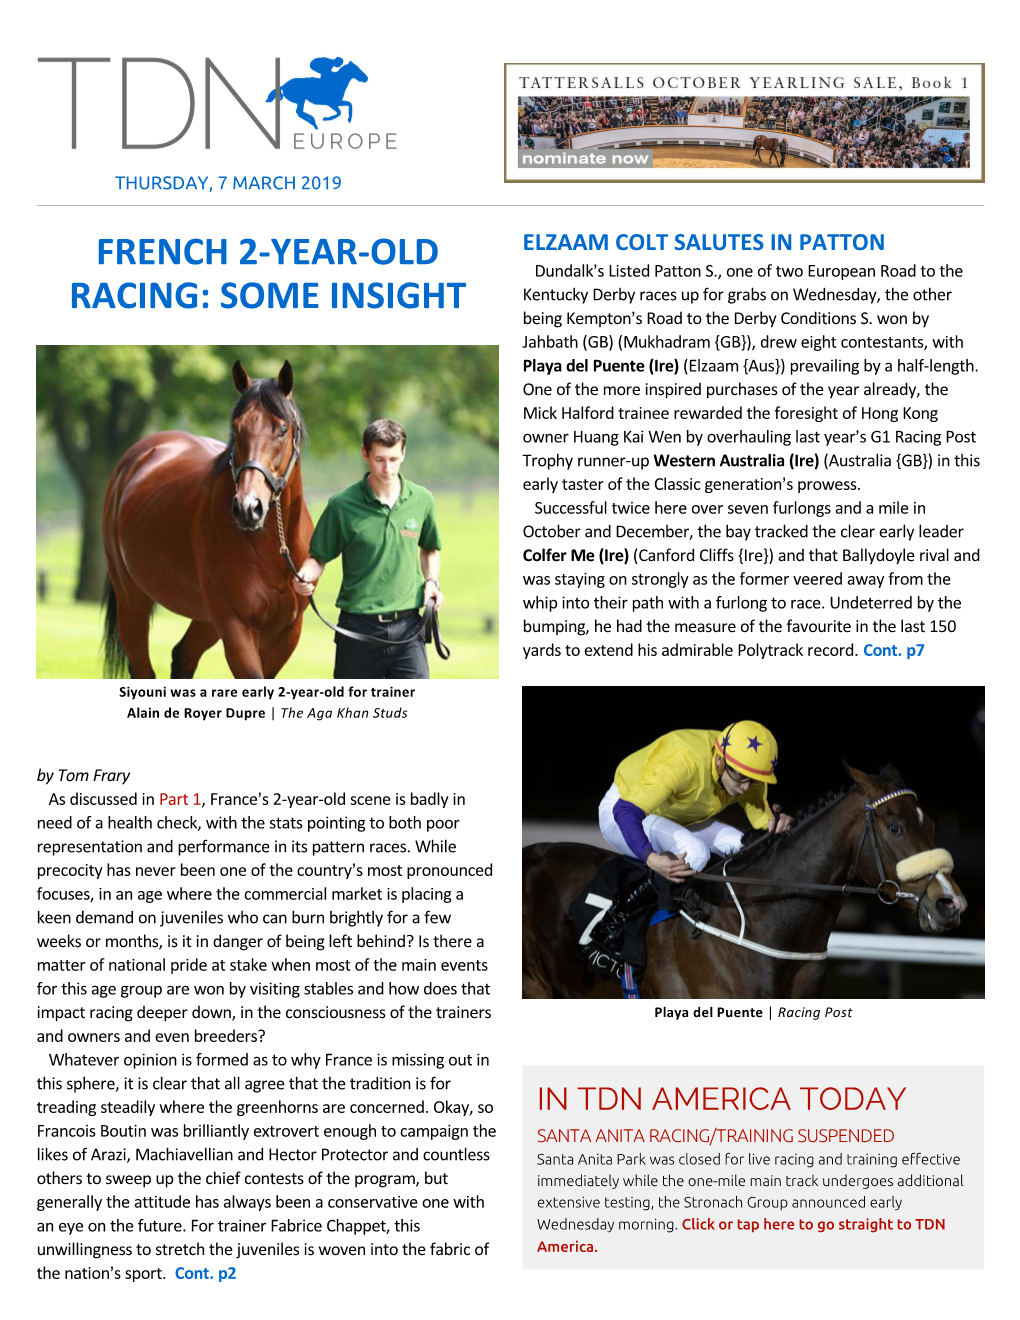 French 2-Year-Old Racing